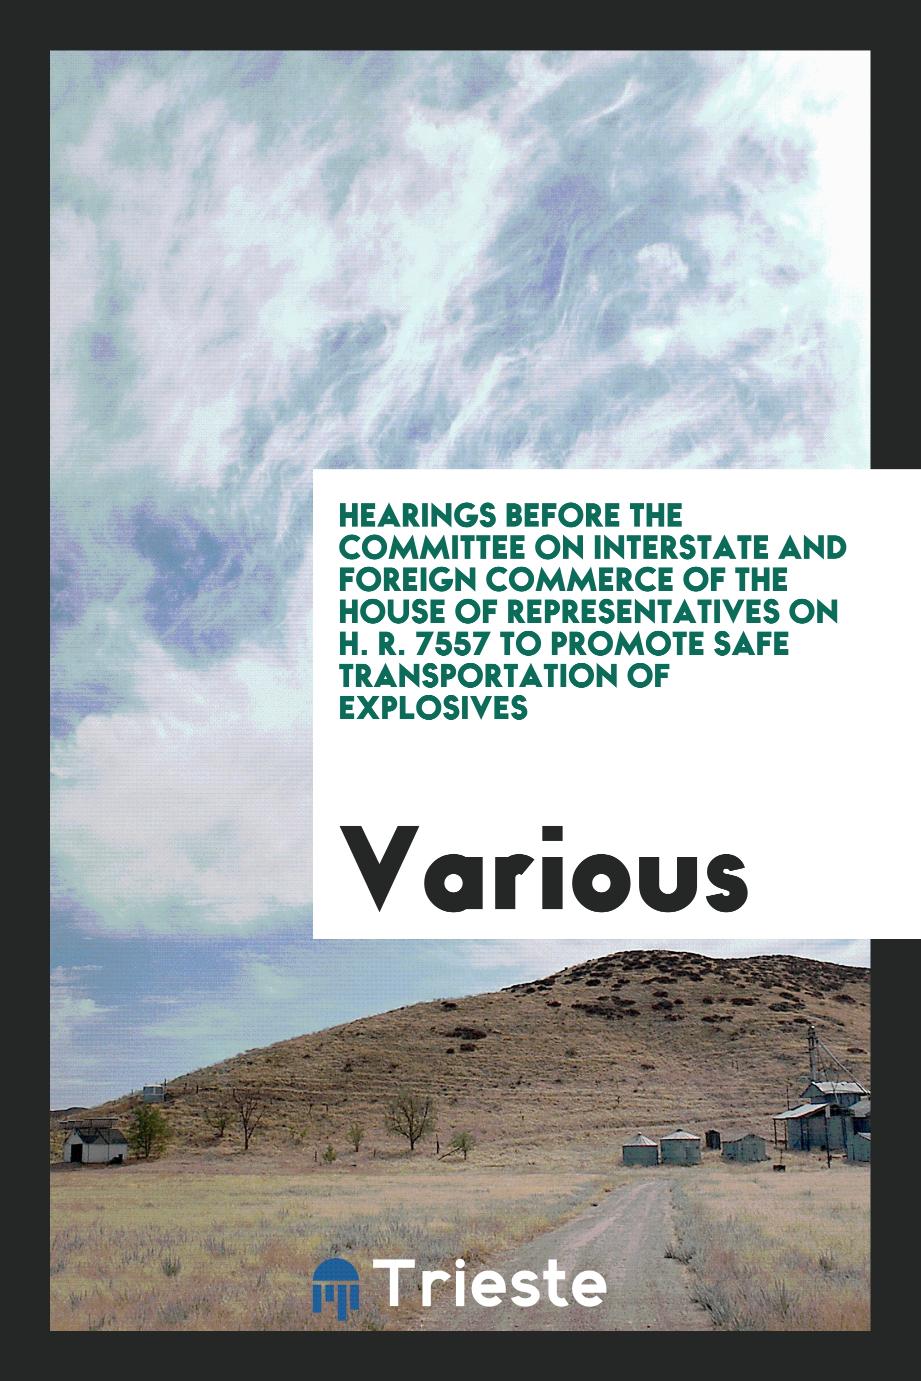 Hearings Before the Committee on Interstate and Foreign Commerce of the House of Representatives on H. R. 7557 to Promote Safe Transportation of Explosives